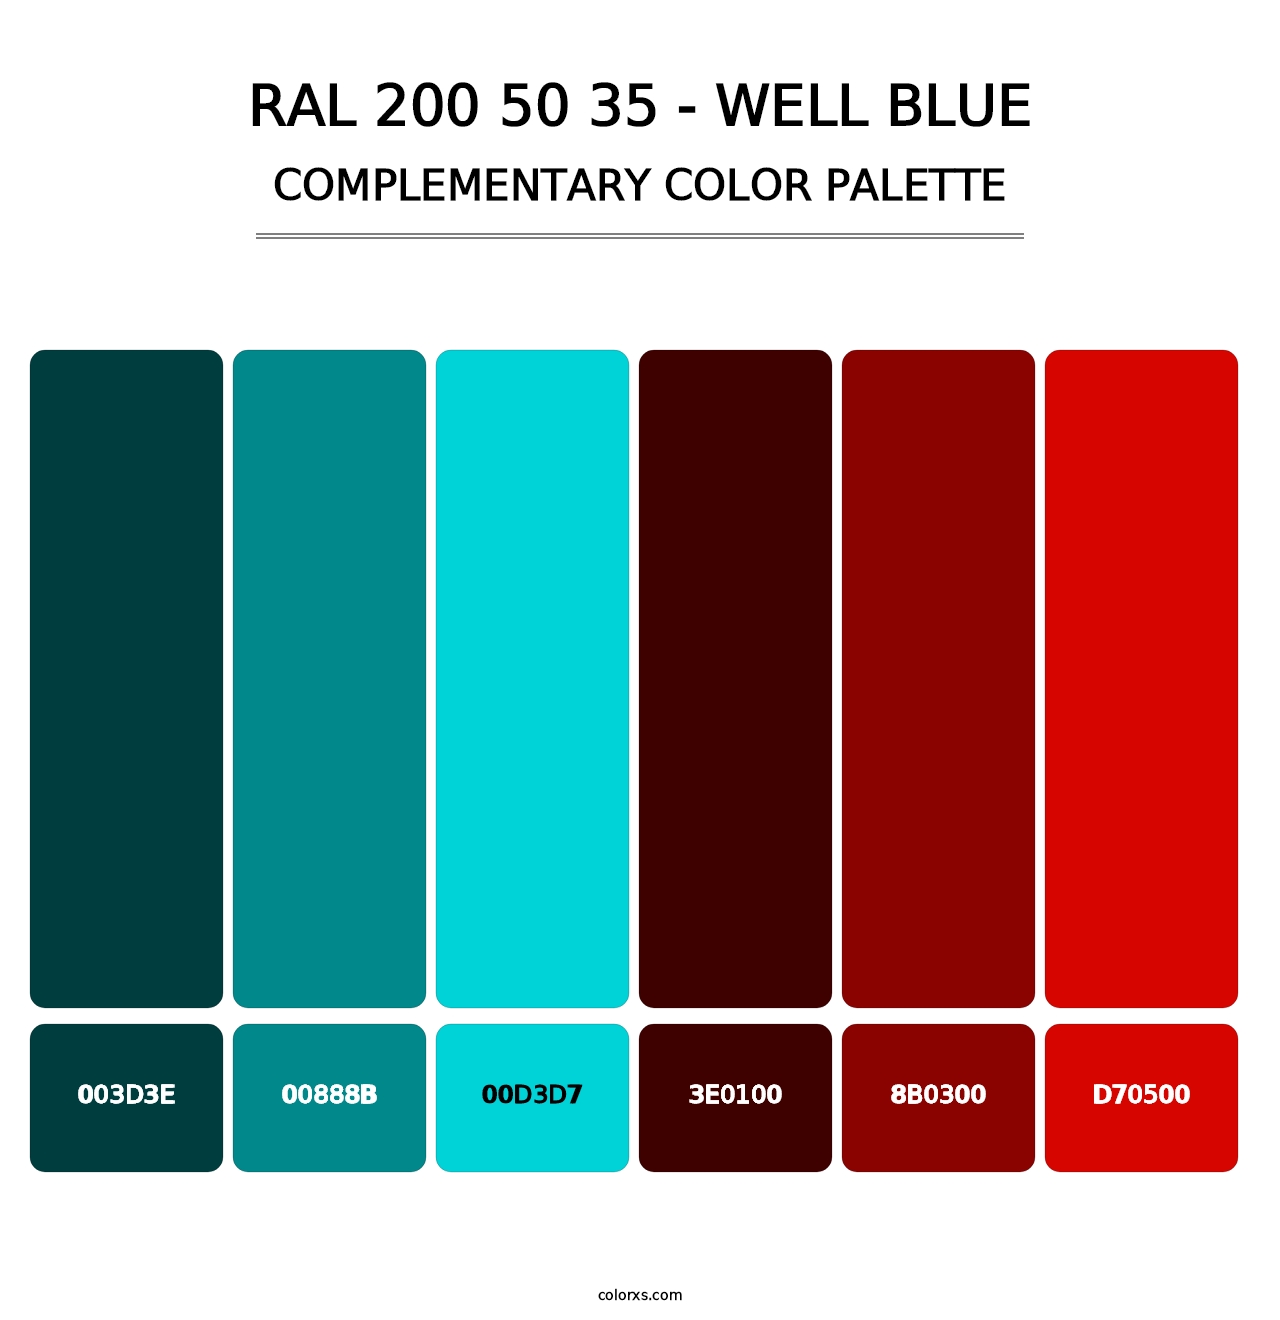 RAL 200 50 35 - Well Blue - Complementary Color Palette